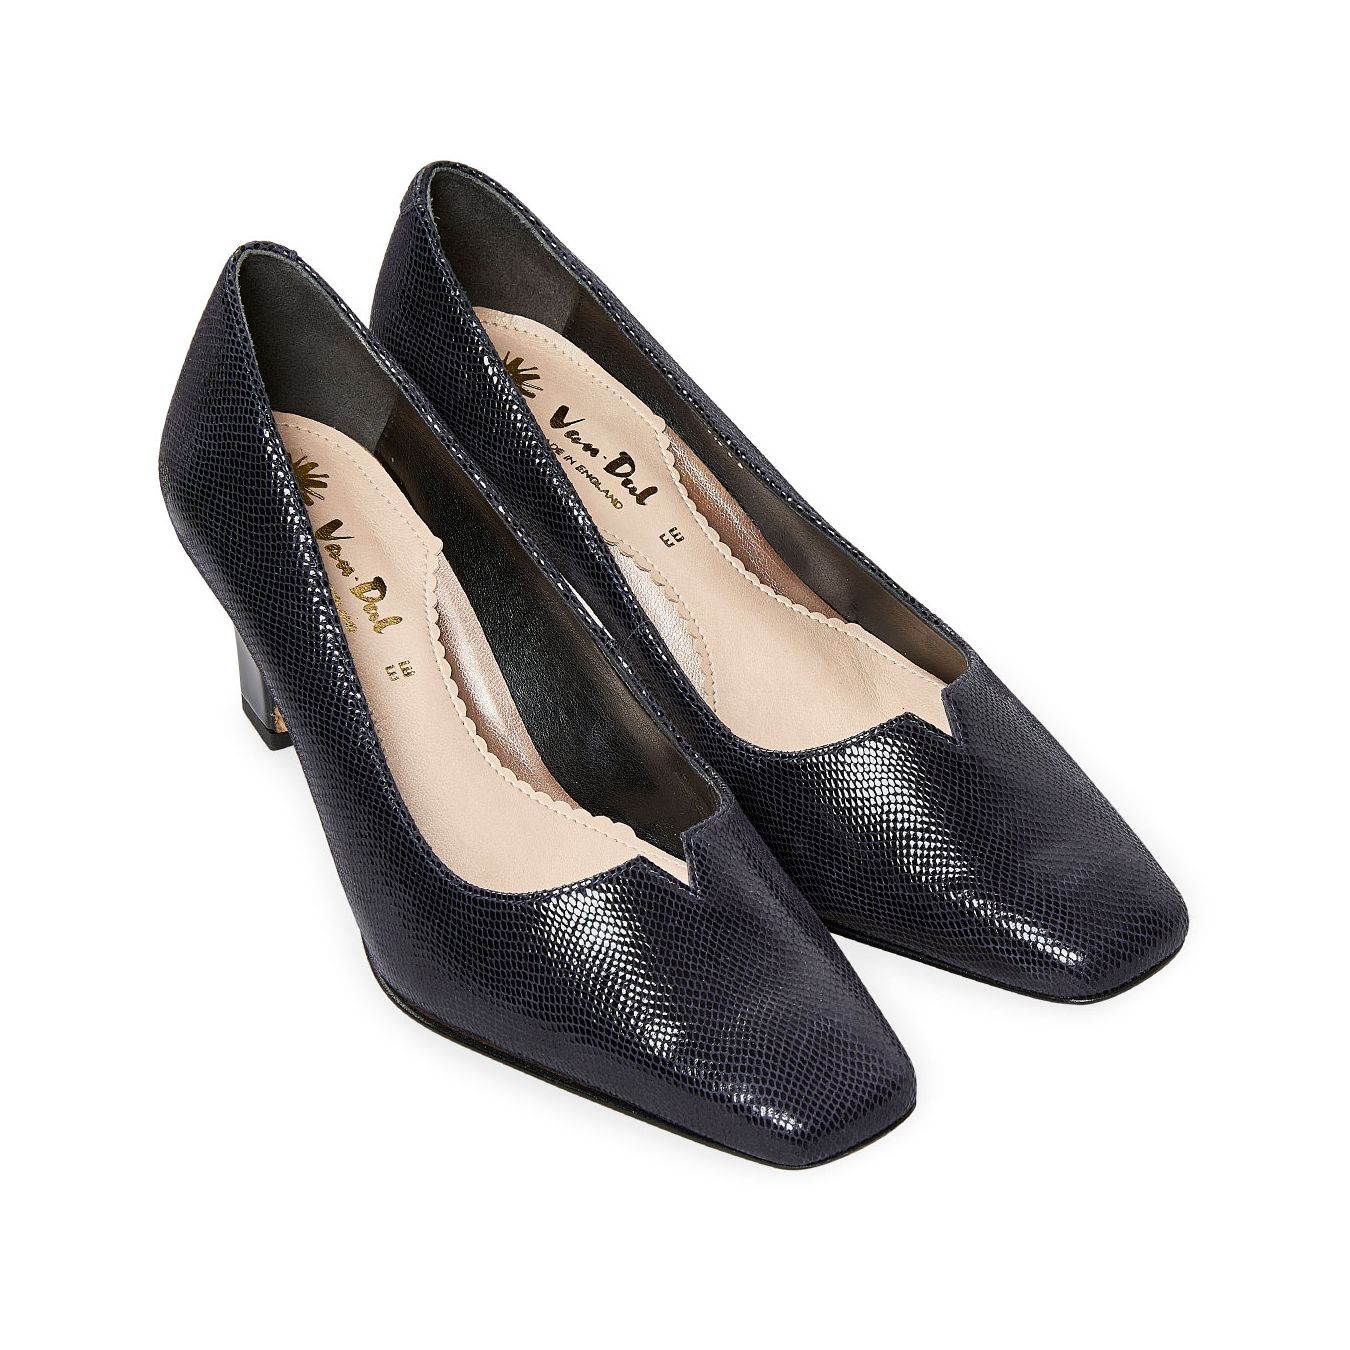 Van Dal Shoes - Eleanor Wider Fitting Court Shoes in Midnight Reptile